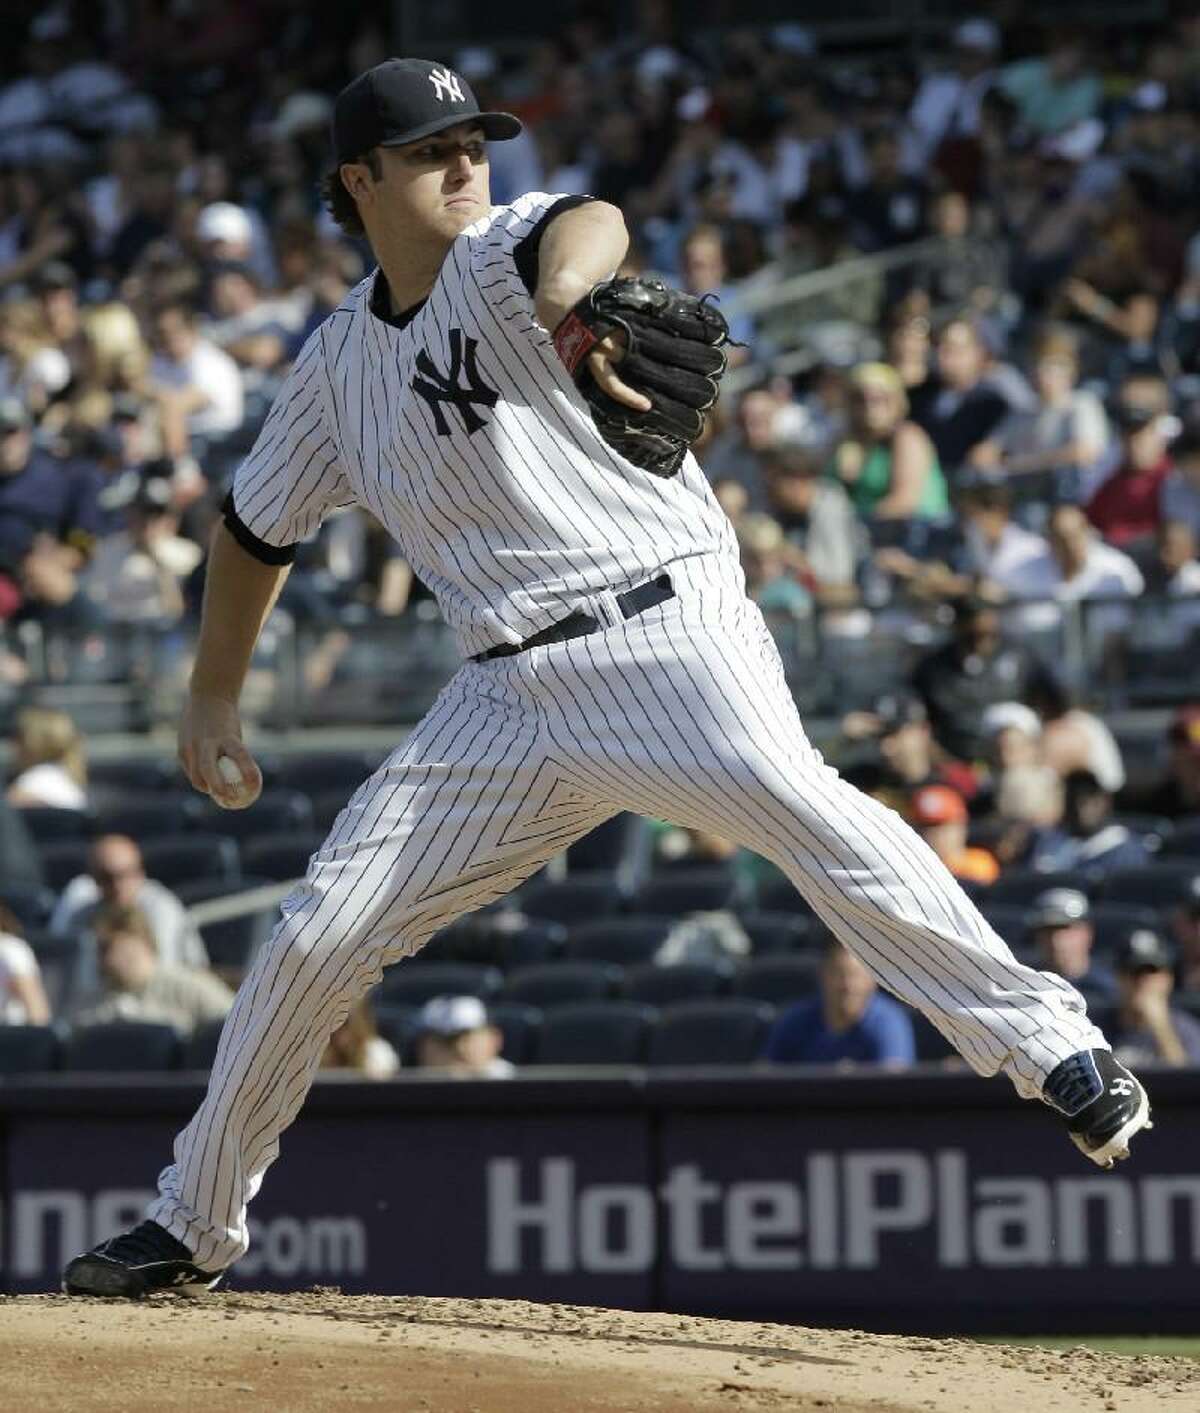 ASSOCIATED PRESS New York Yankees pitcher Phil Hughes throws in the third inning of Saturday's game against the Seattle Mariners at Yankee Stadium in New York. The Yankees won 6-2.